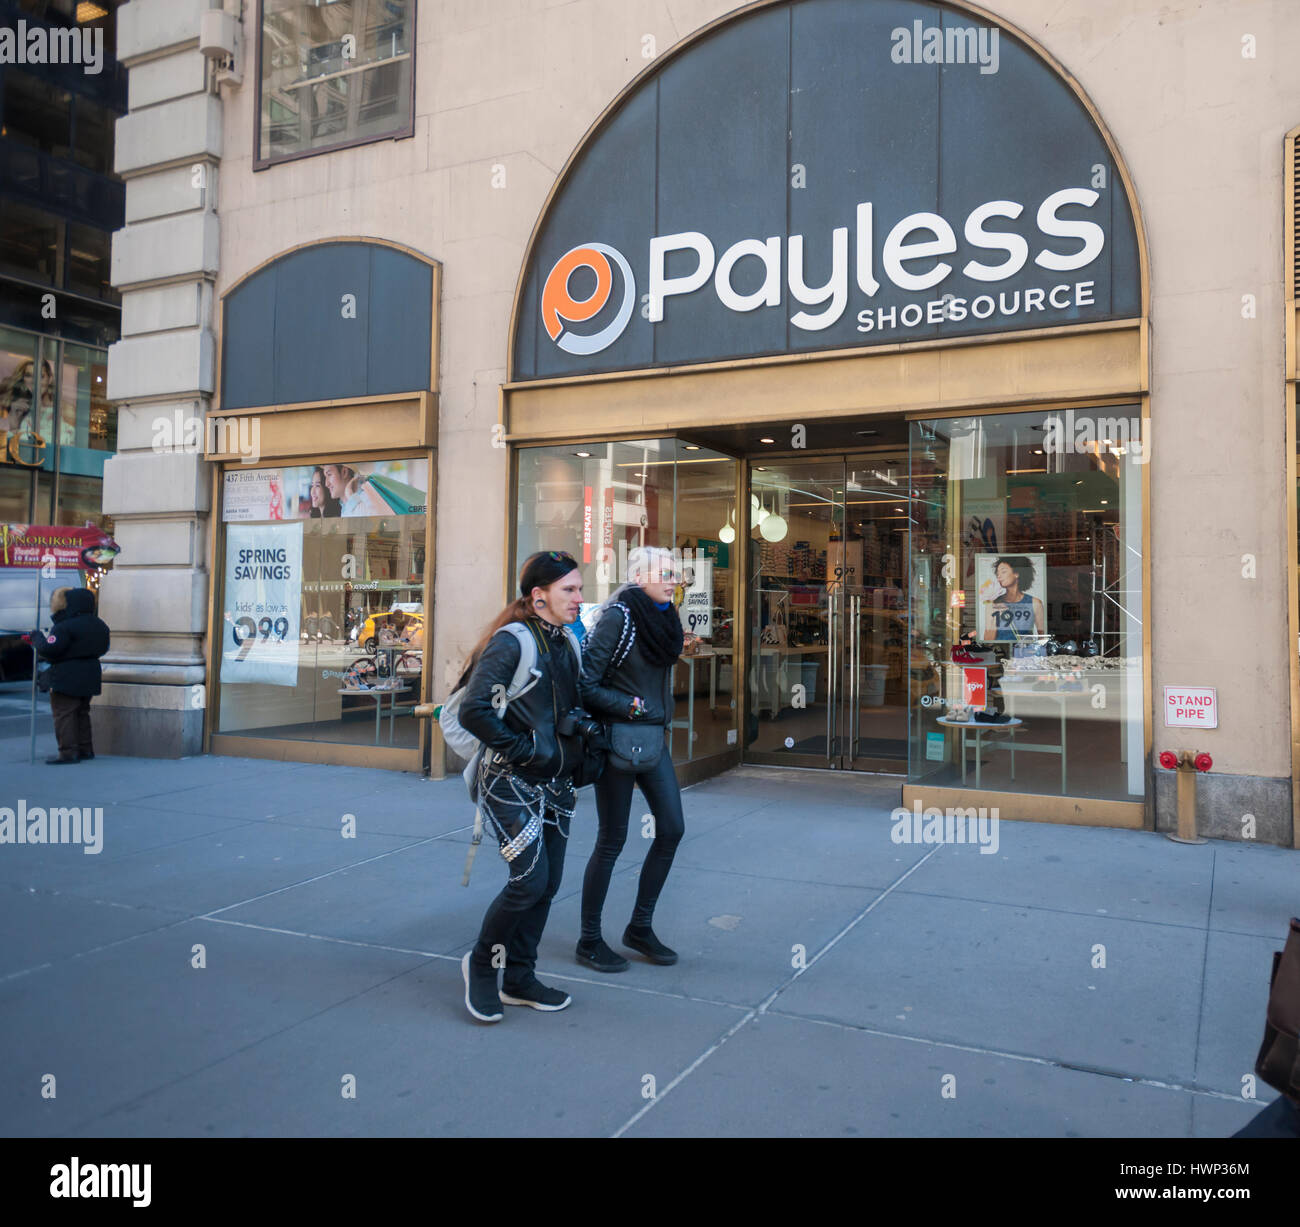 A soon to be closed Payless ShoeSource store in New York on Wednesday, March 22, 2017. Payless plans to shutter between 400 and 500 stores and is reported to be ready to seek bankruptcy protection next week. (© Richard B. Levine) Stock Photo